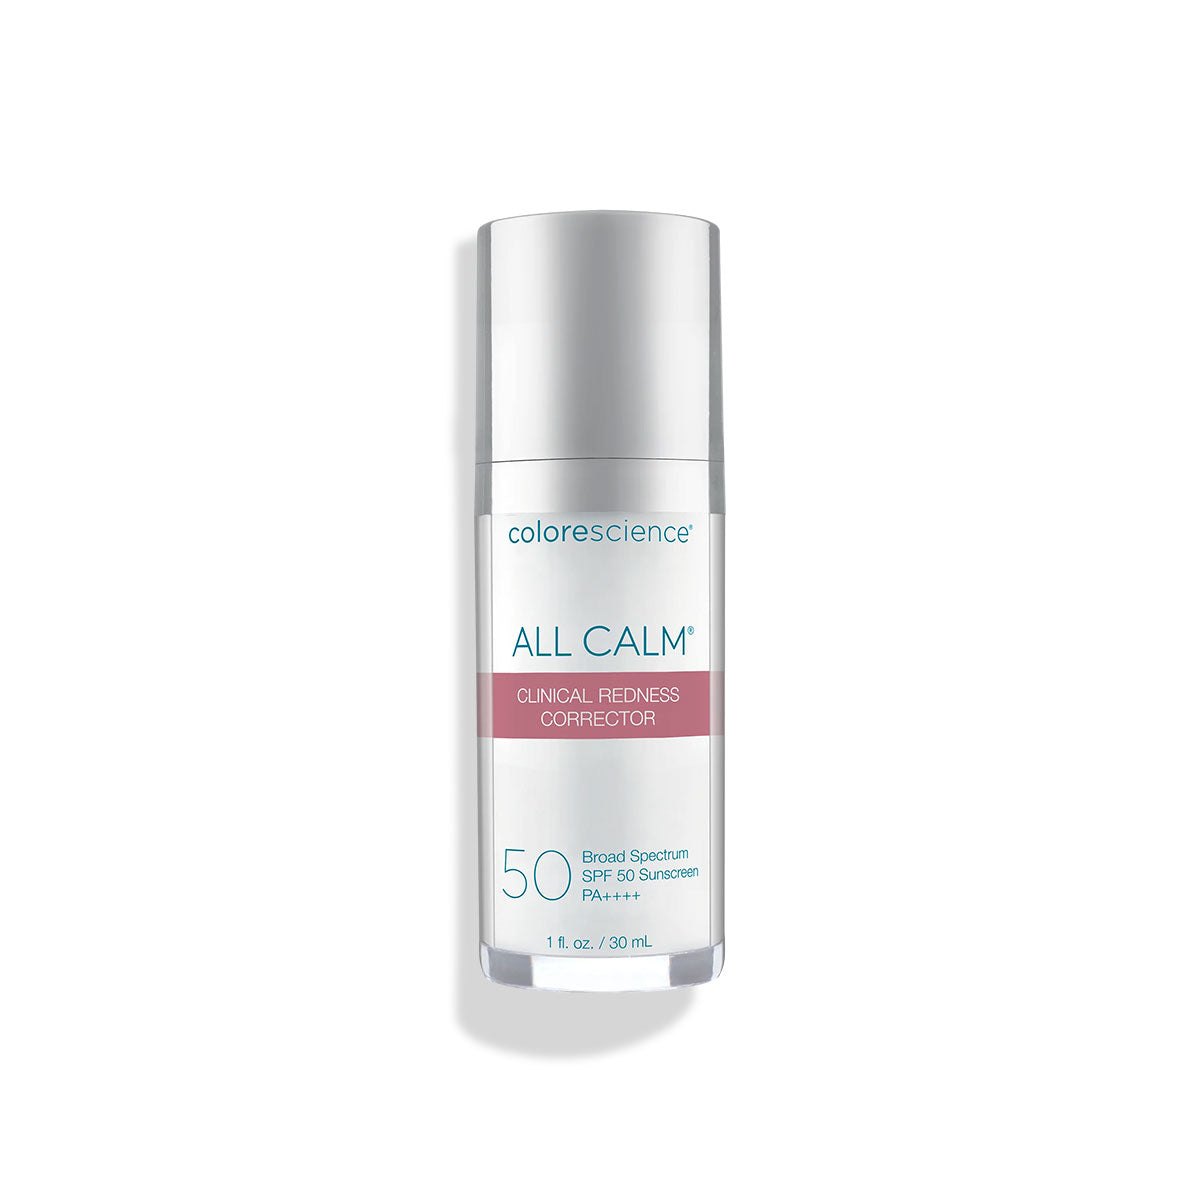 30mL colorescience all calm clinical redness corrector with broad spectrum SPF 50 sunscreen